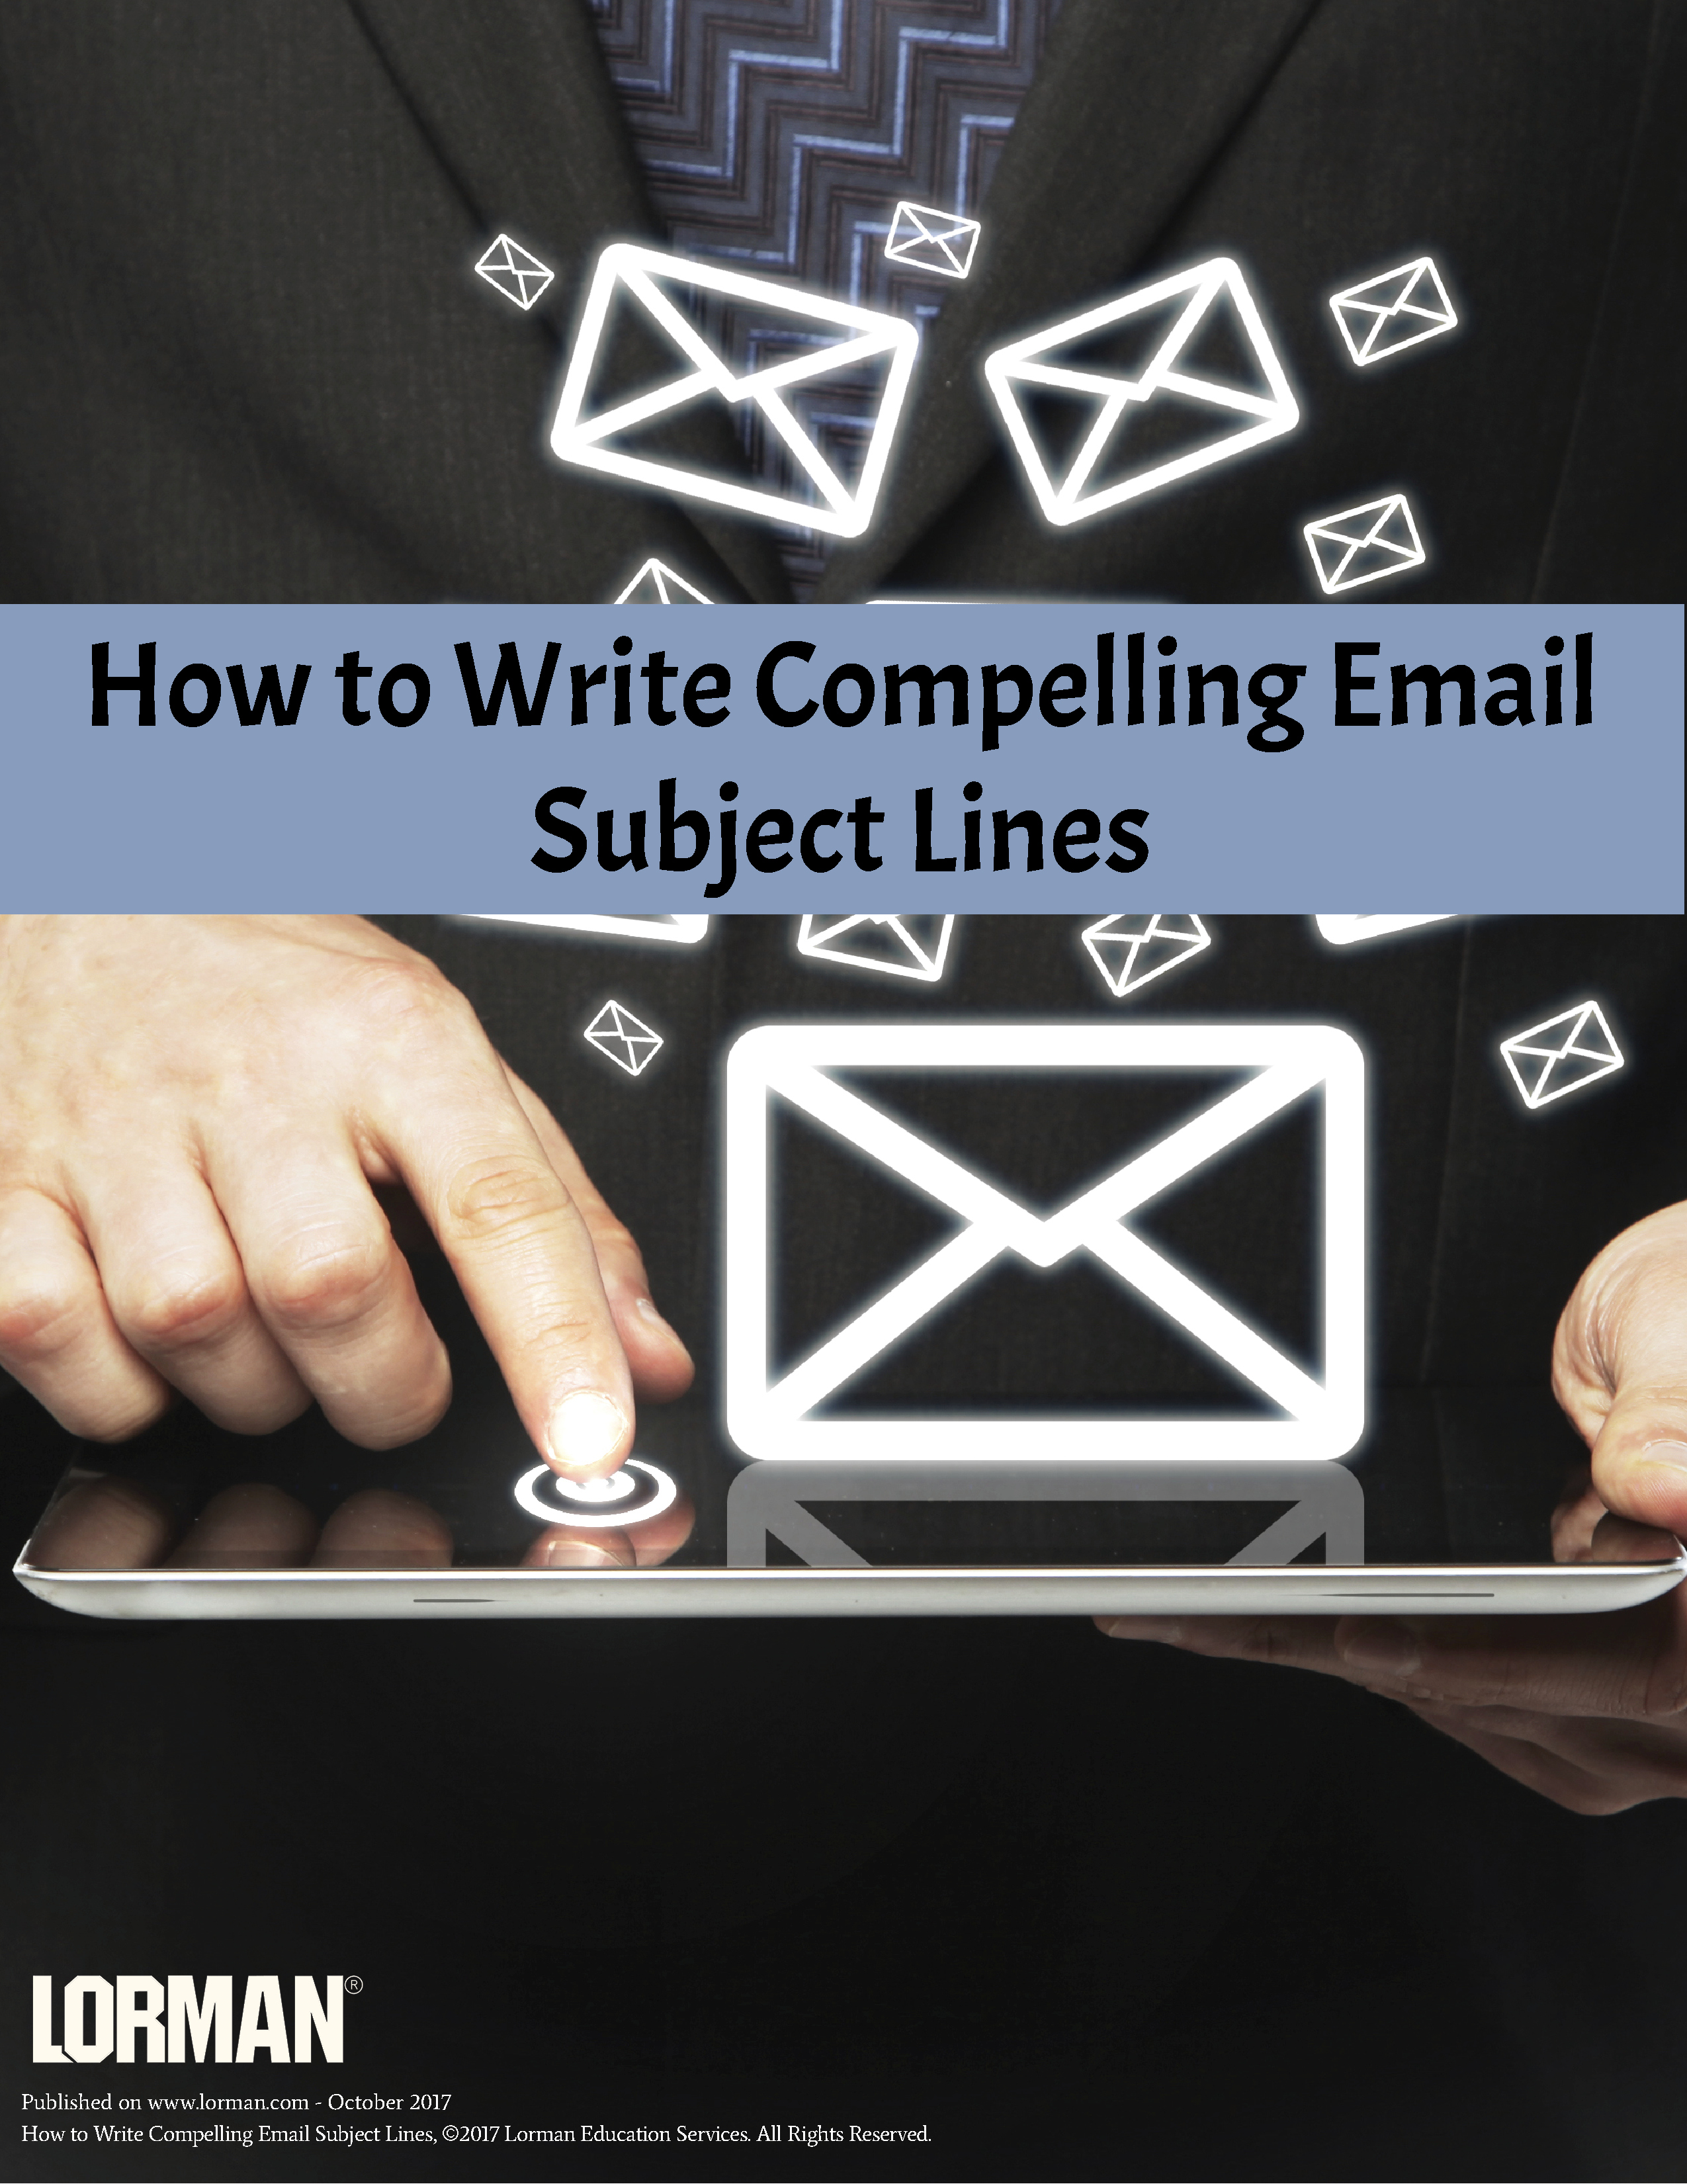 How to Write Compelling Email Subject Lines